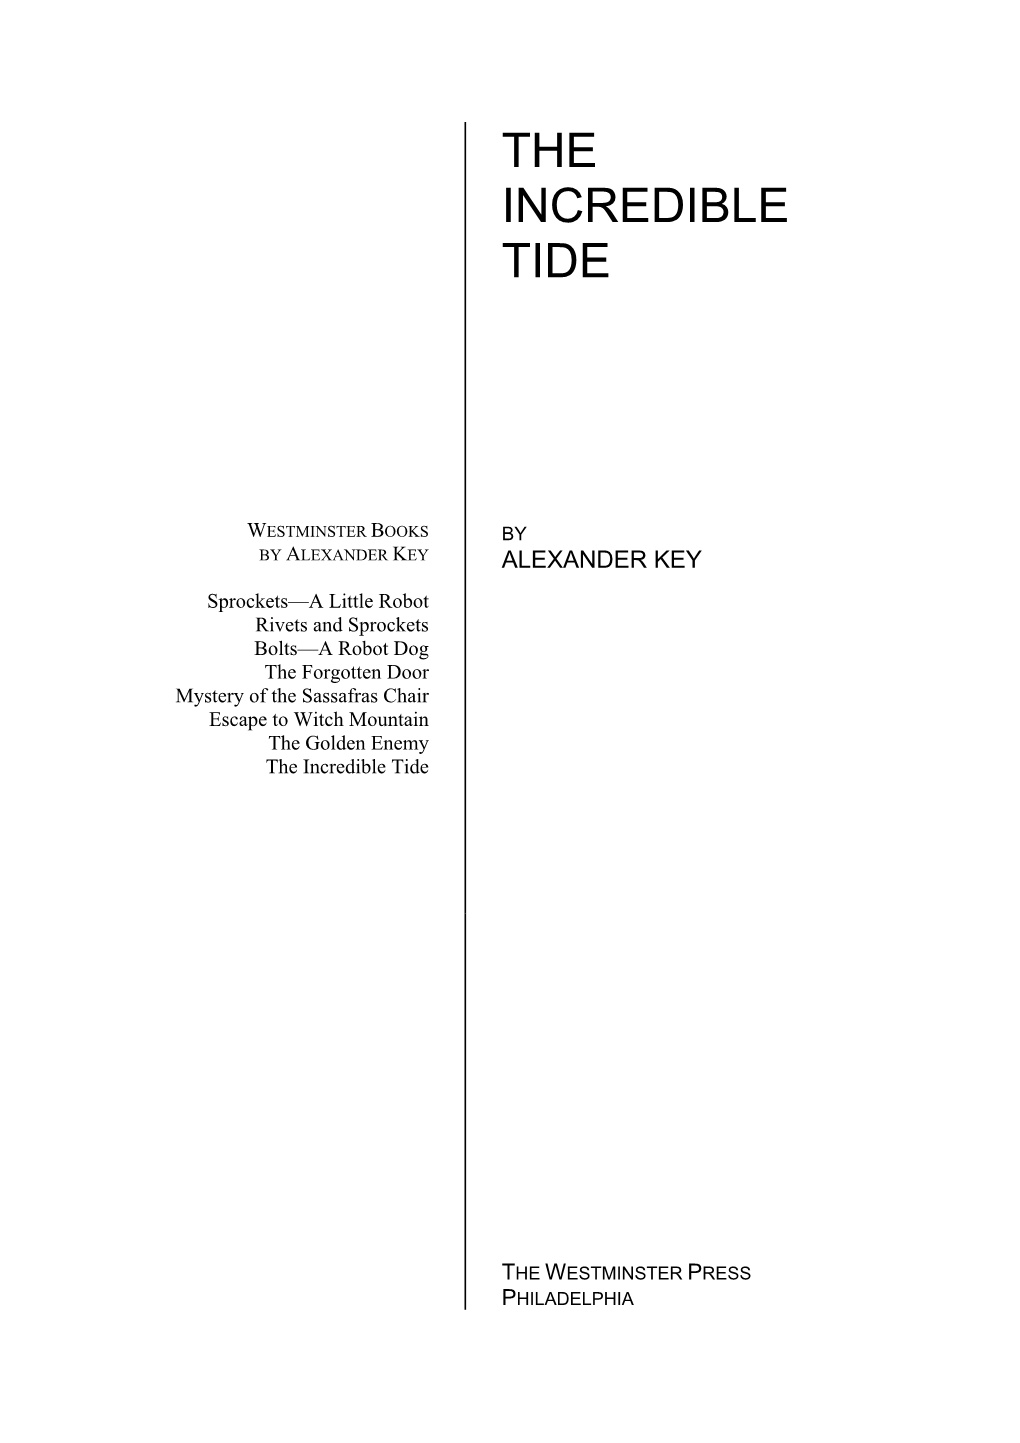 The Incredible Tide